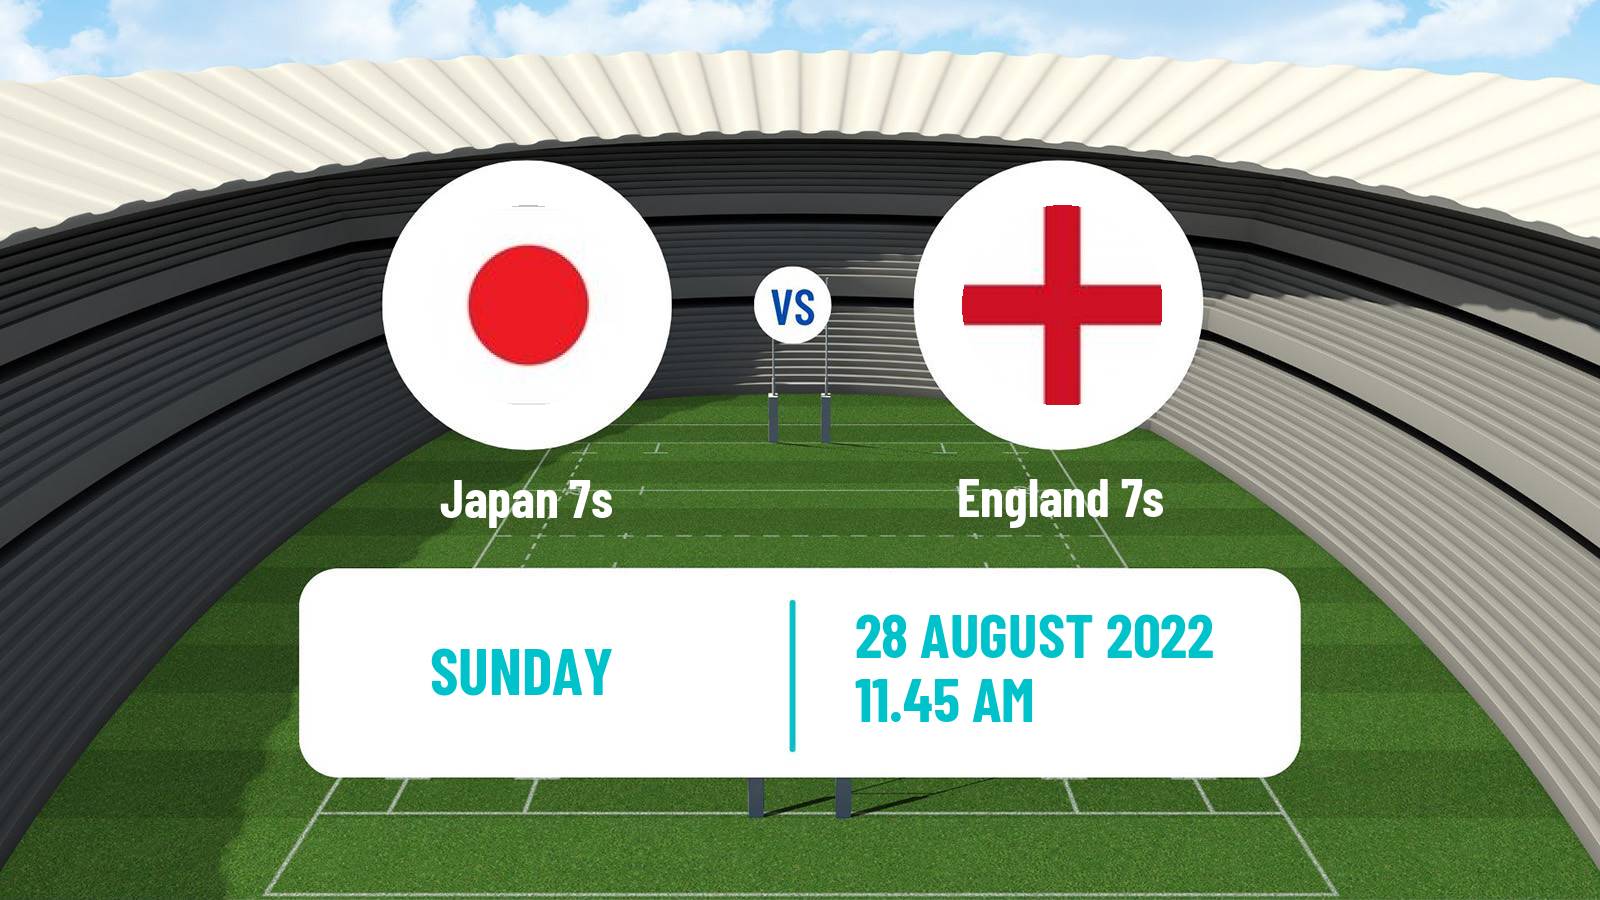 Rugby union Sevens World Series - USA Japan 7s - England 7s